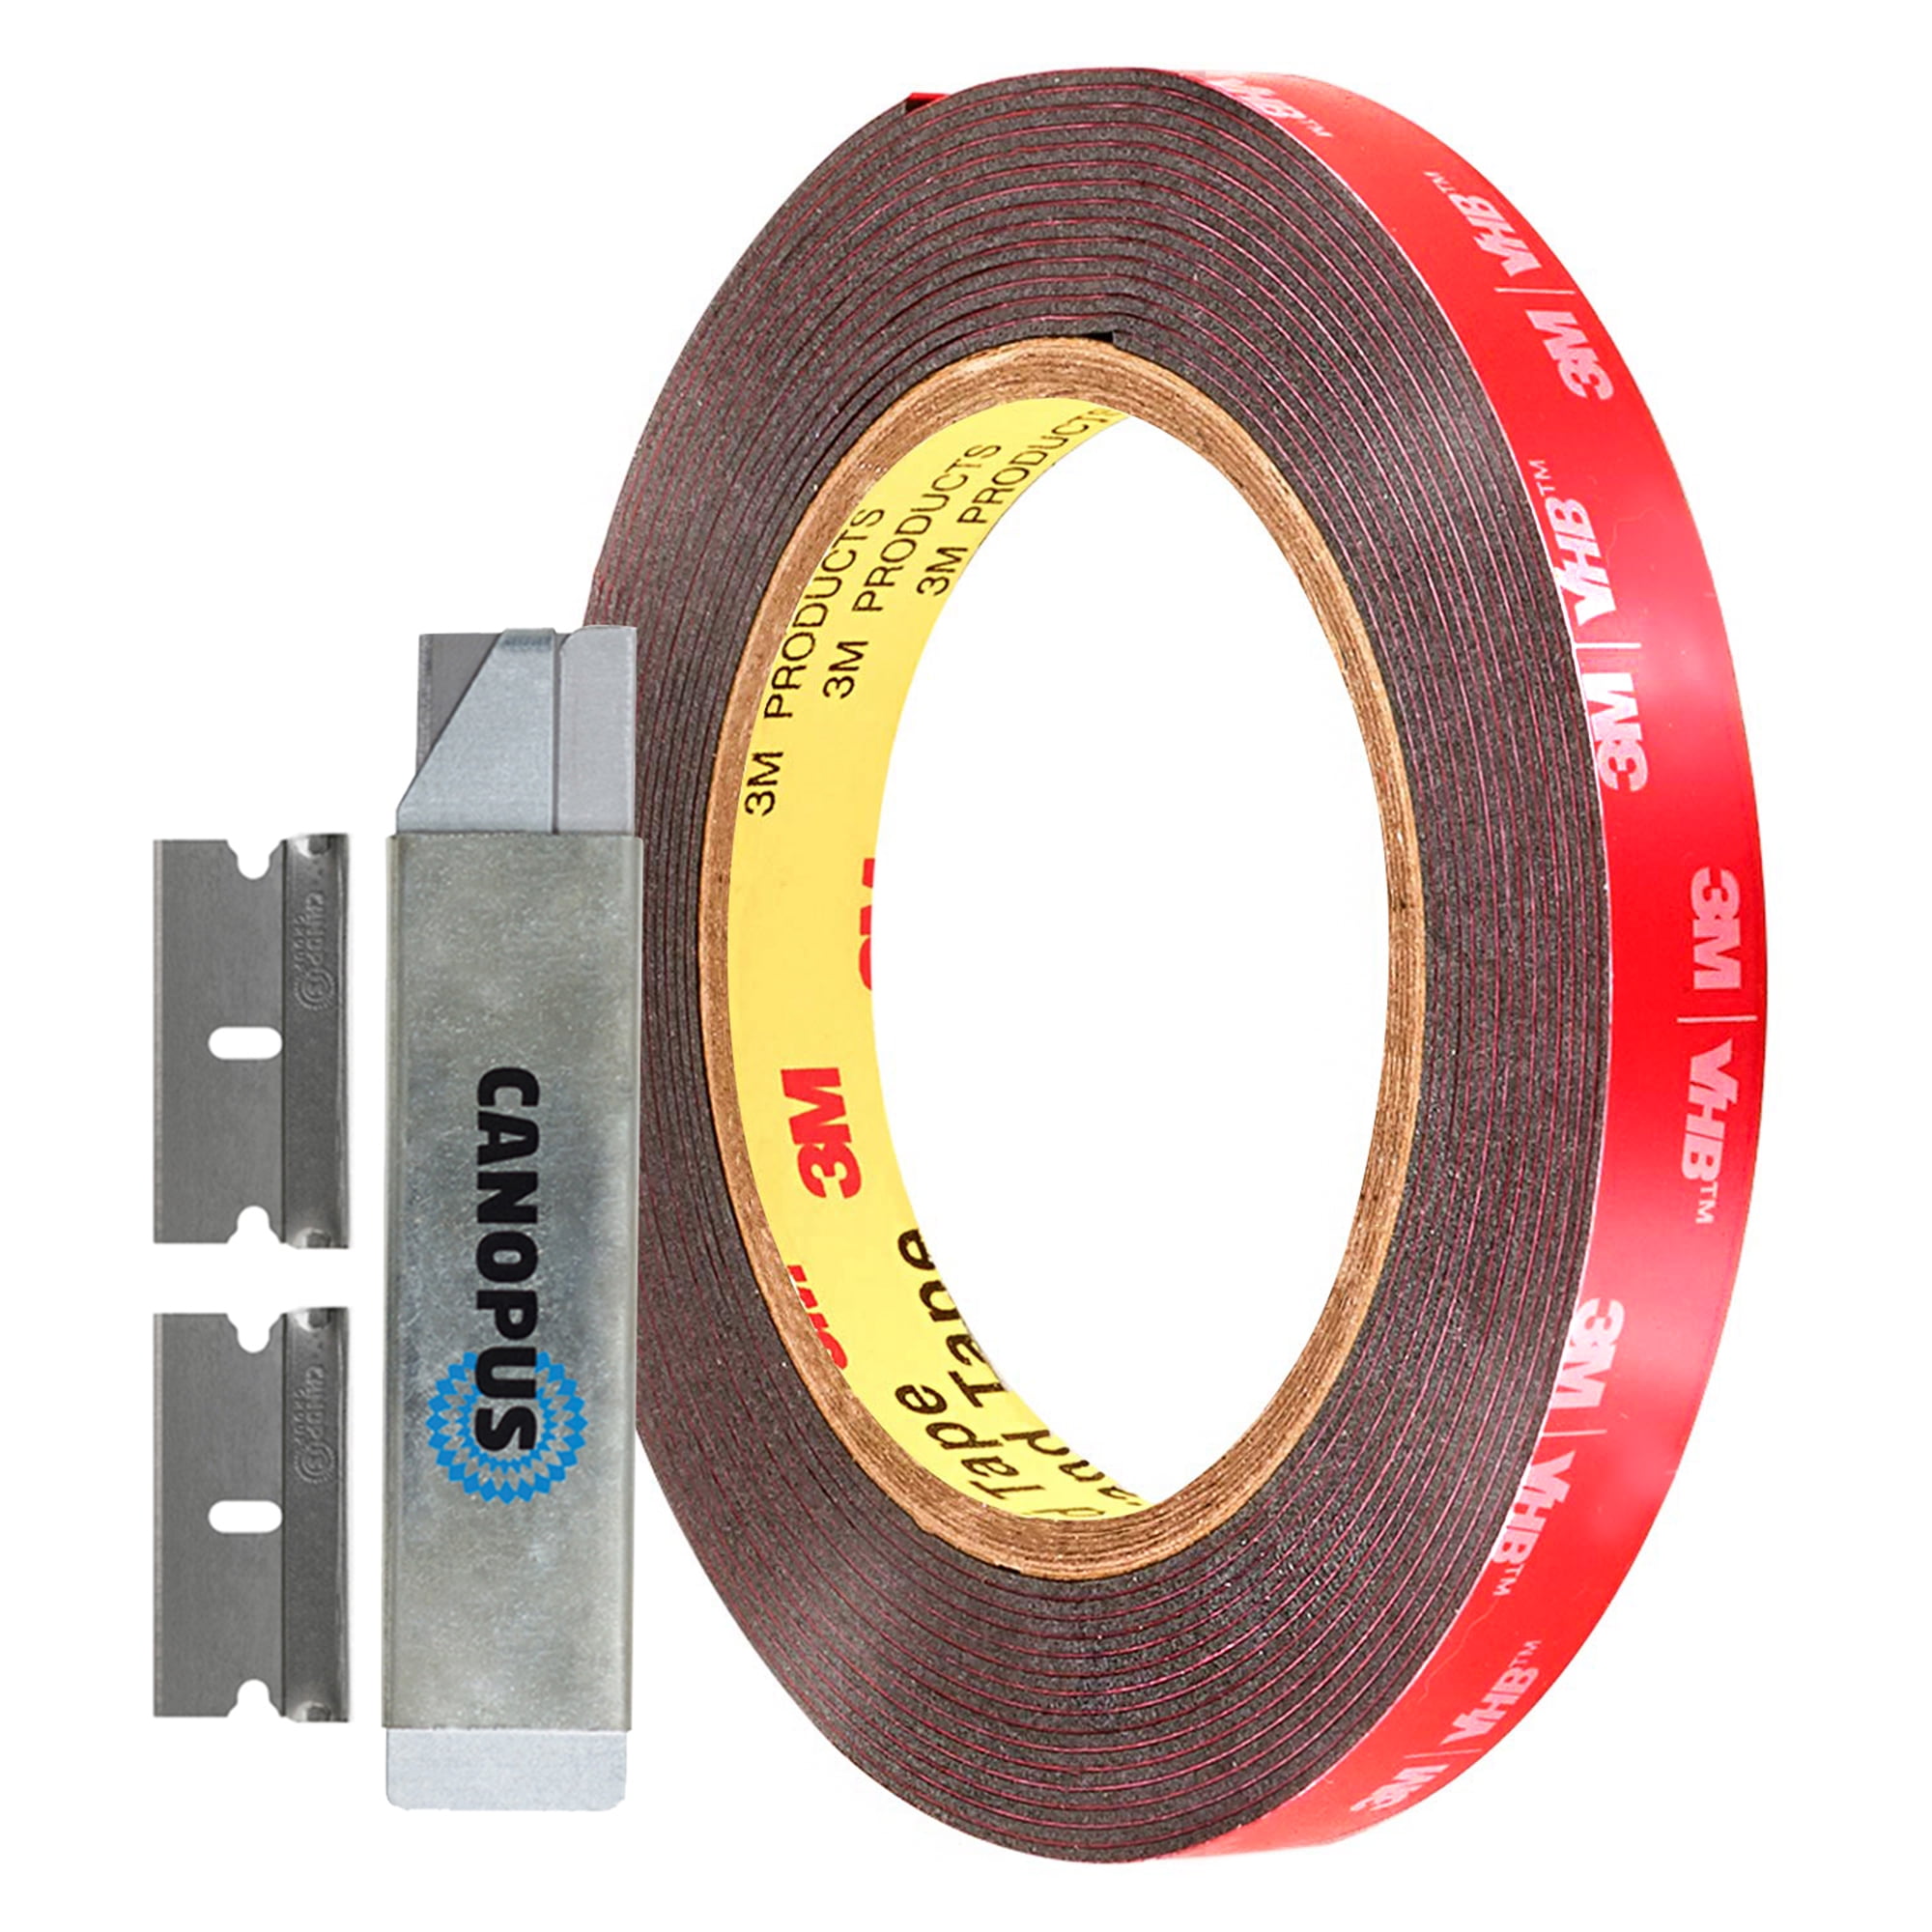 Canopus Double Sided Tape, 5952 Heavy Duty Mounting Tape, Strong Bond & Weatherproof Seal Strip for Automotive Mounting, Picture and Photo Frame